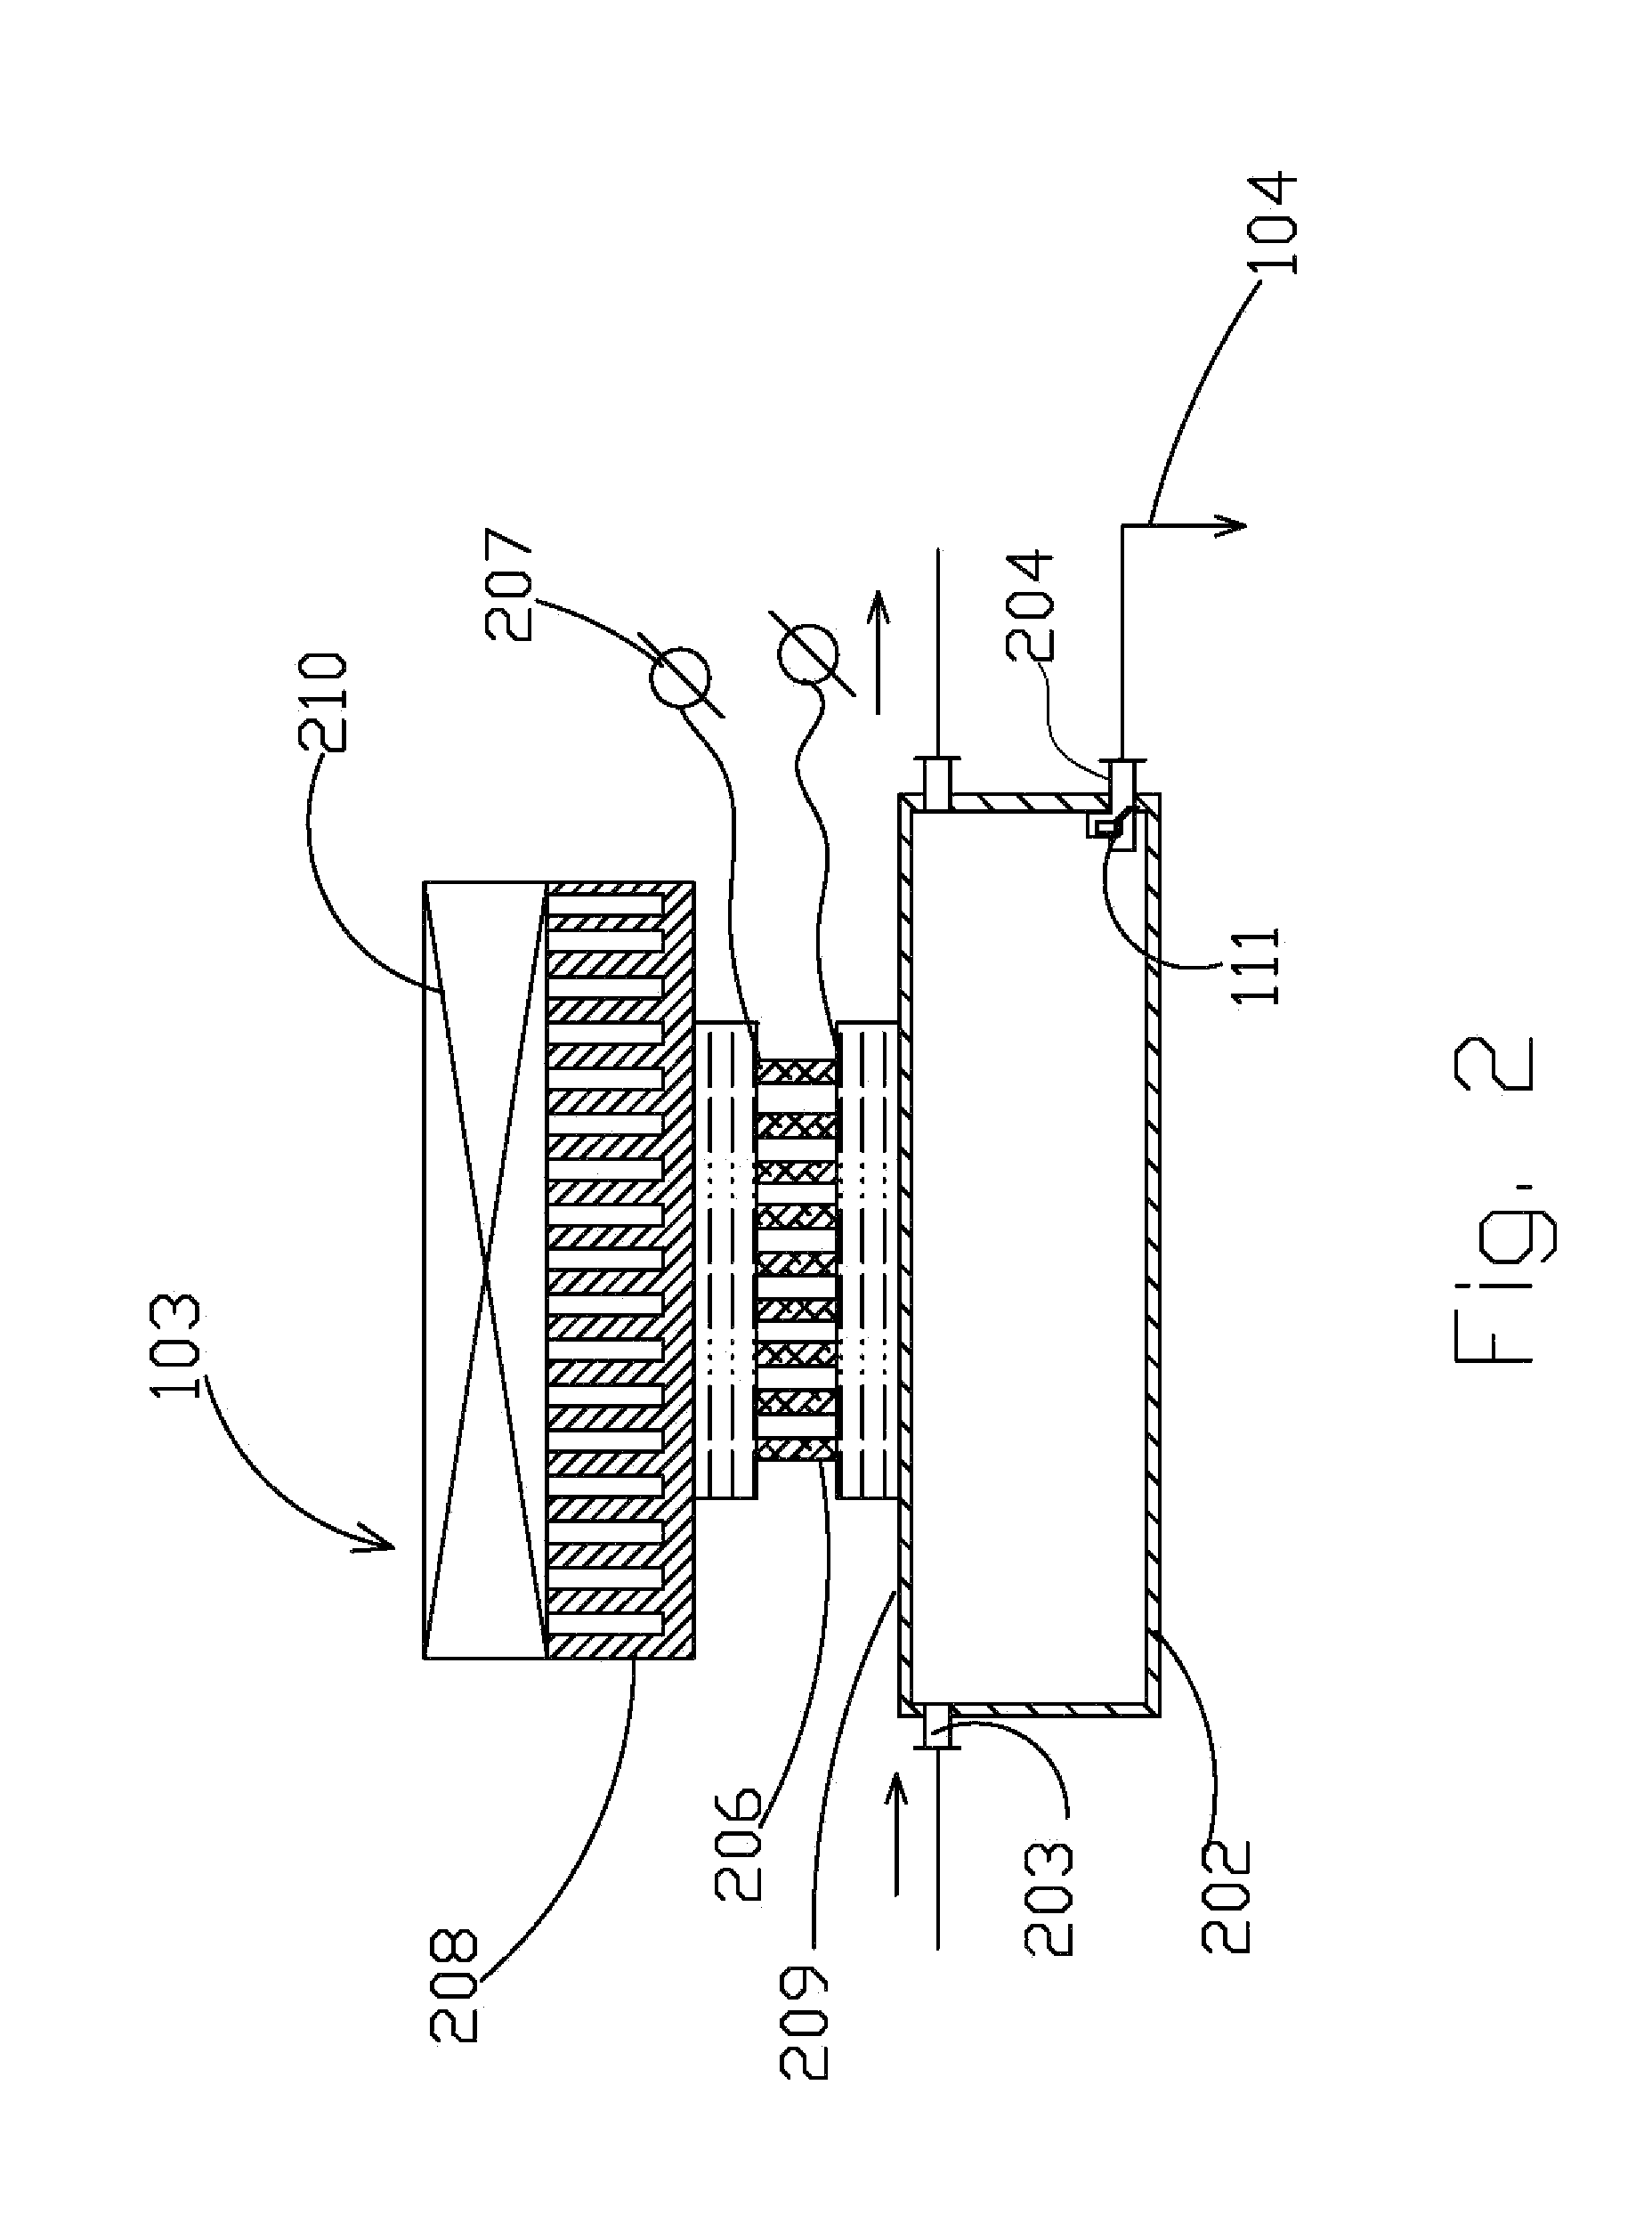 Apparatus and Method for Condensing Contaminants for a Cryogenic System